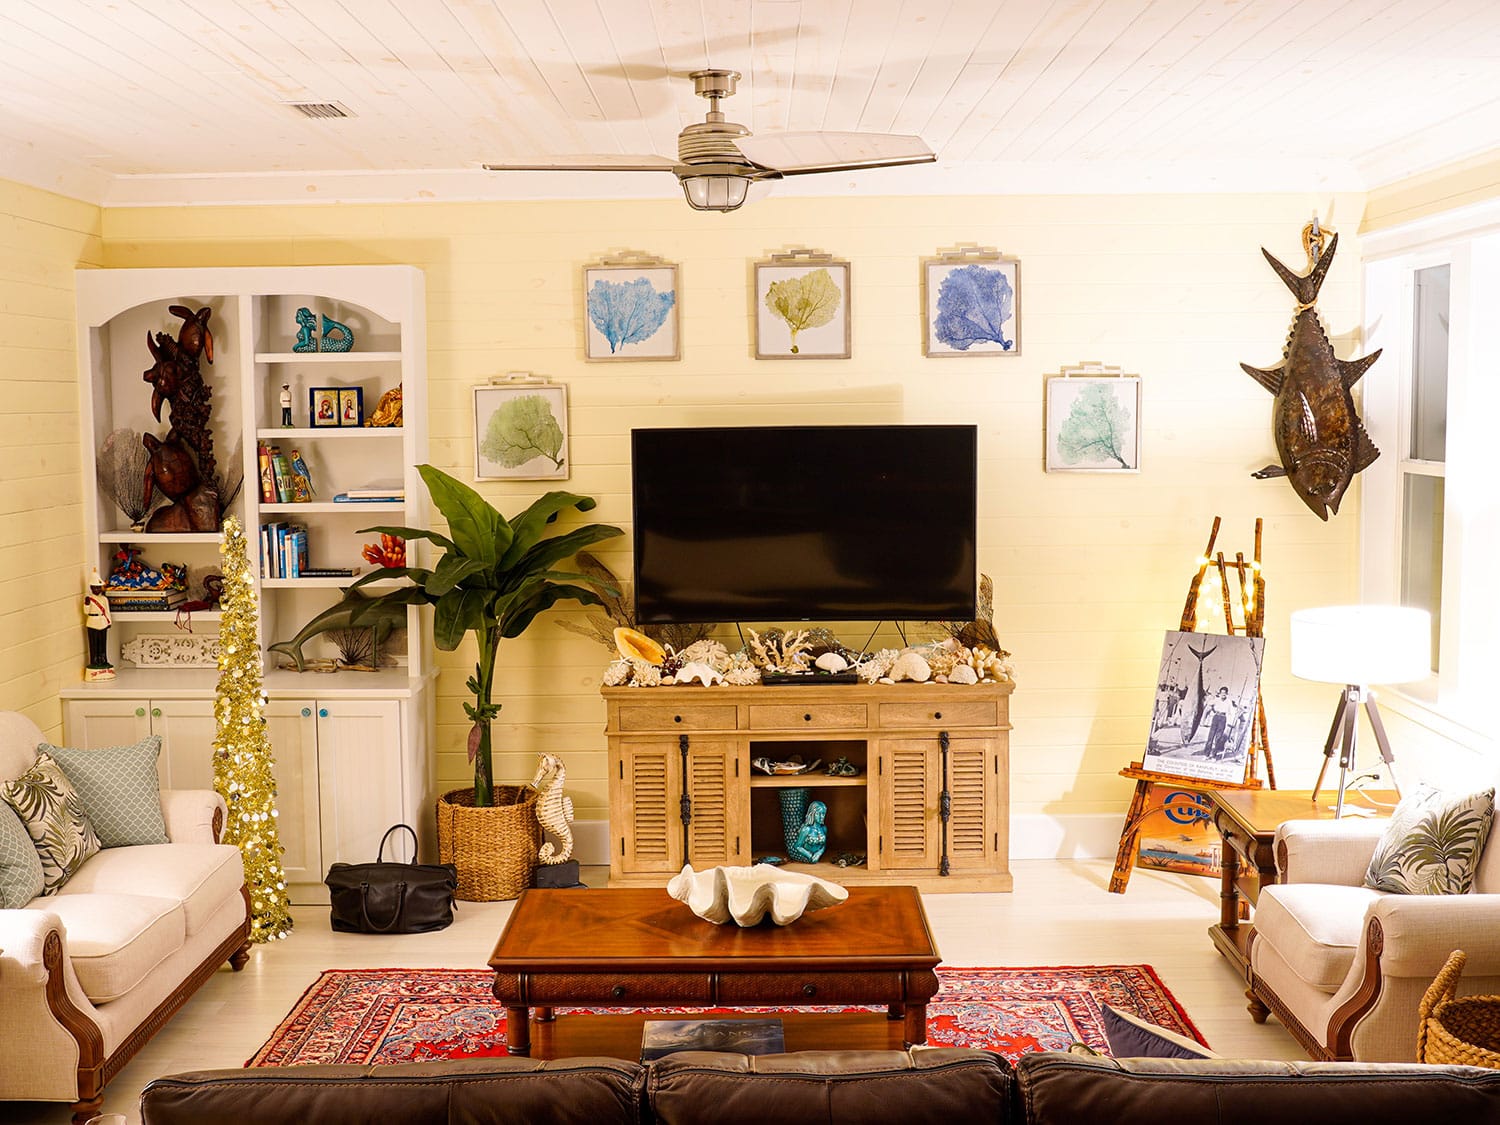 The living room space of the Shellona Abaco Beach House rental, located in the Bahama Palm Shores neighborhood in the Bahamas.